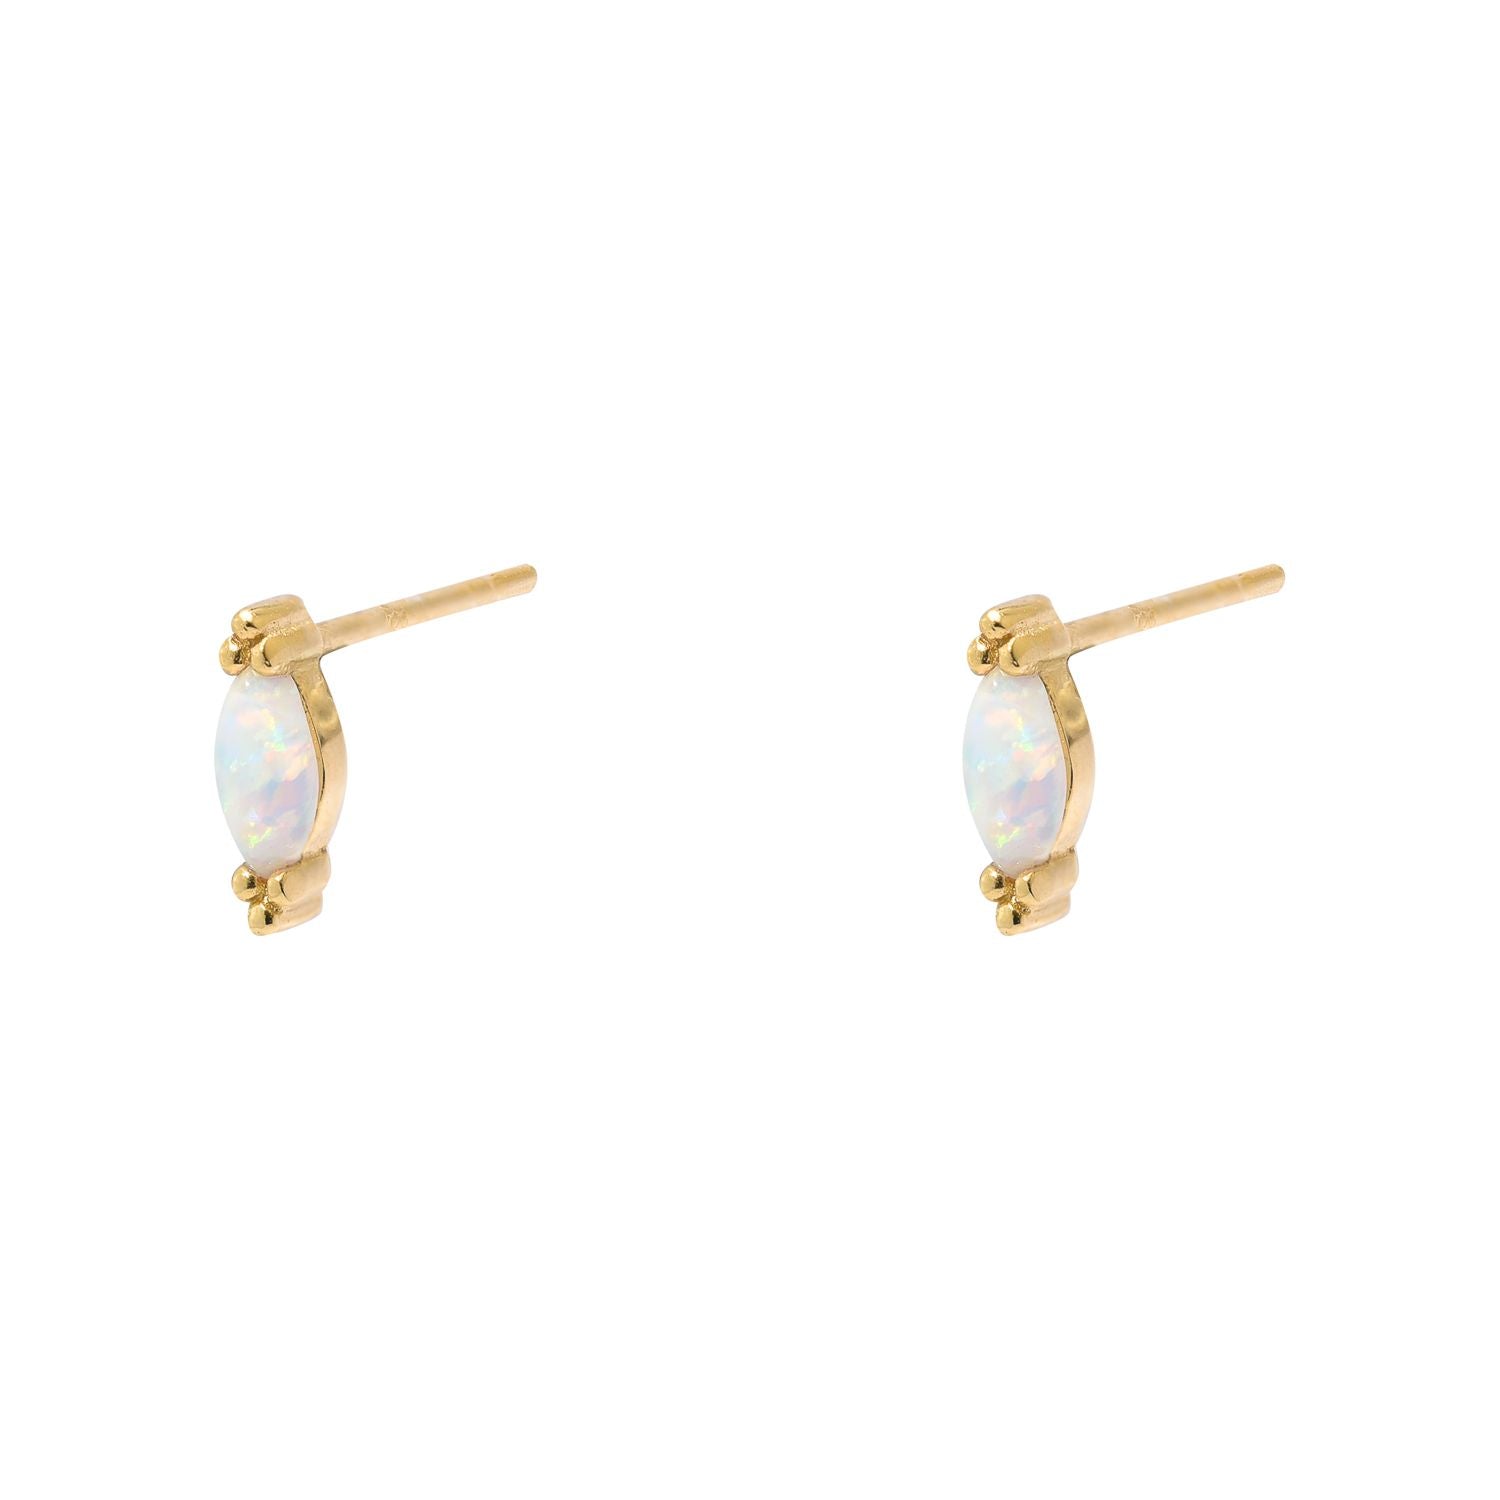 Gold Plated Details White Opalite Stud Earrings